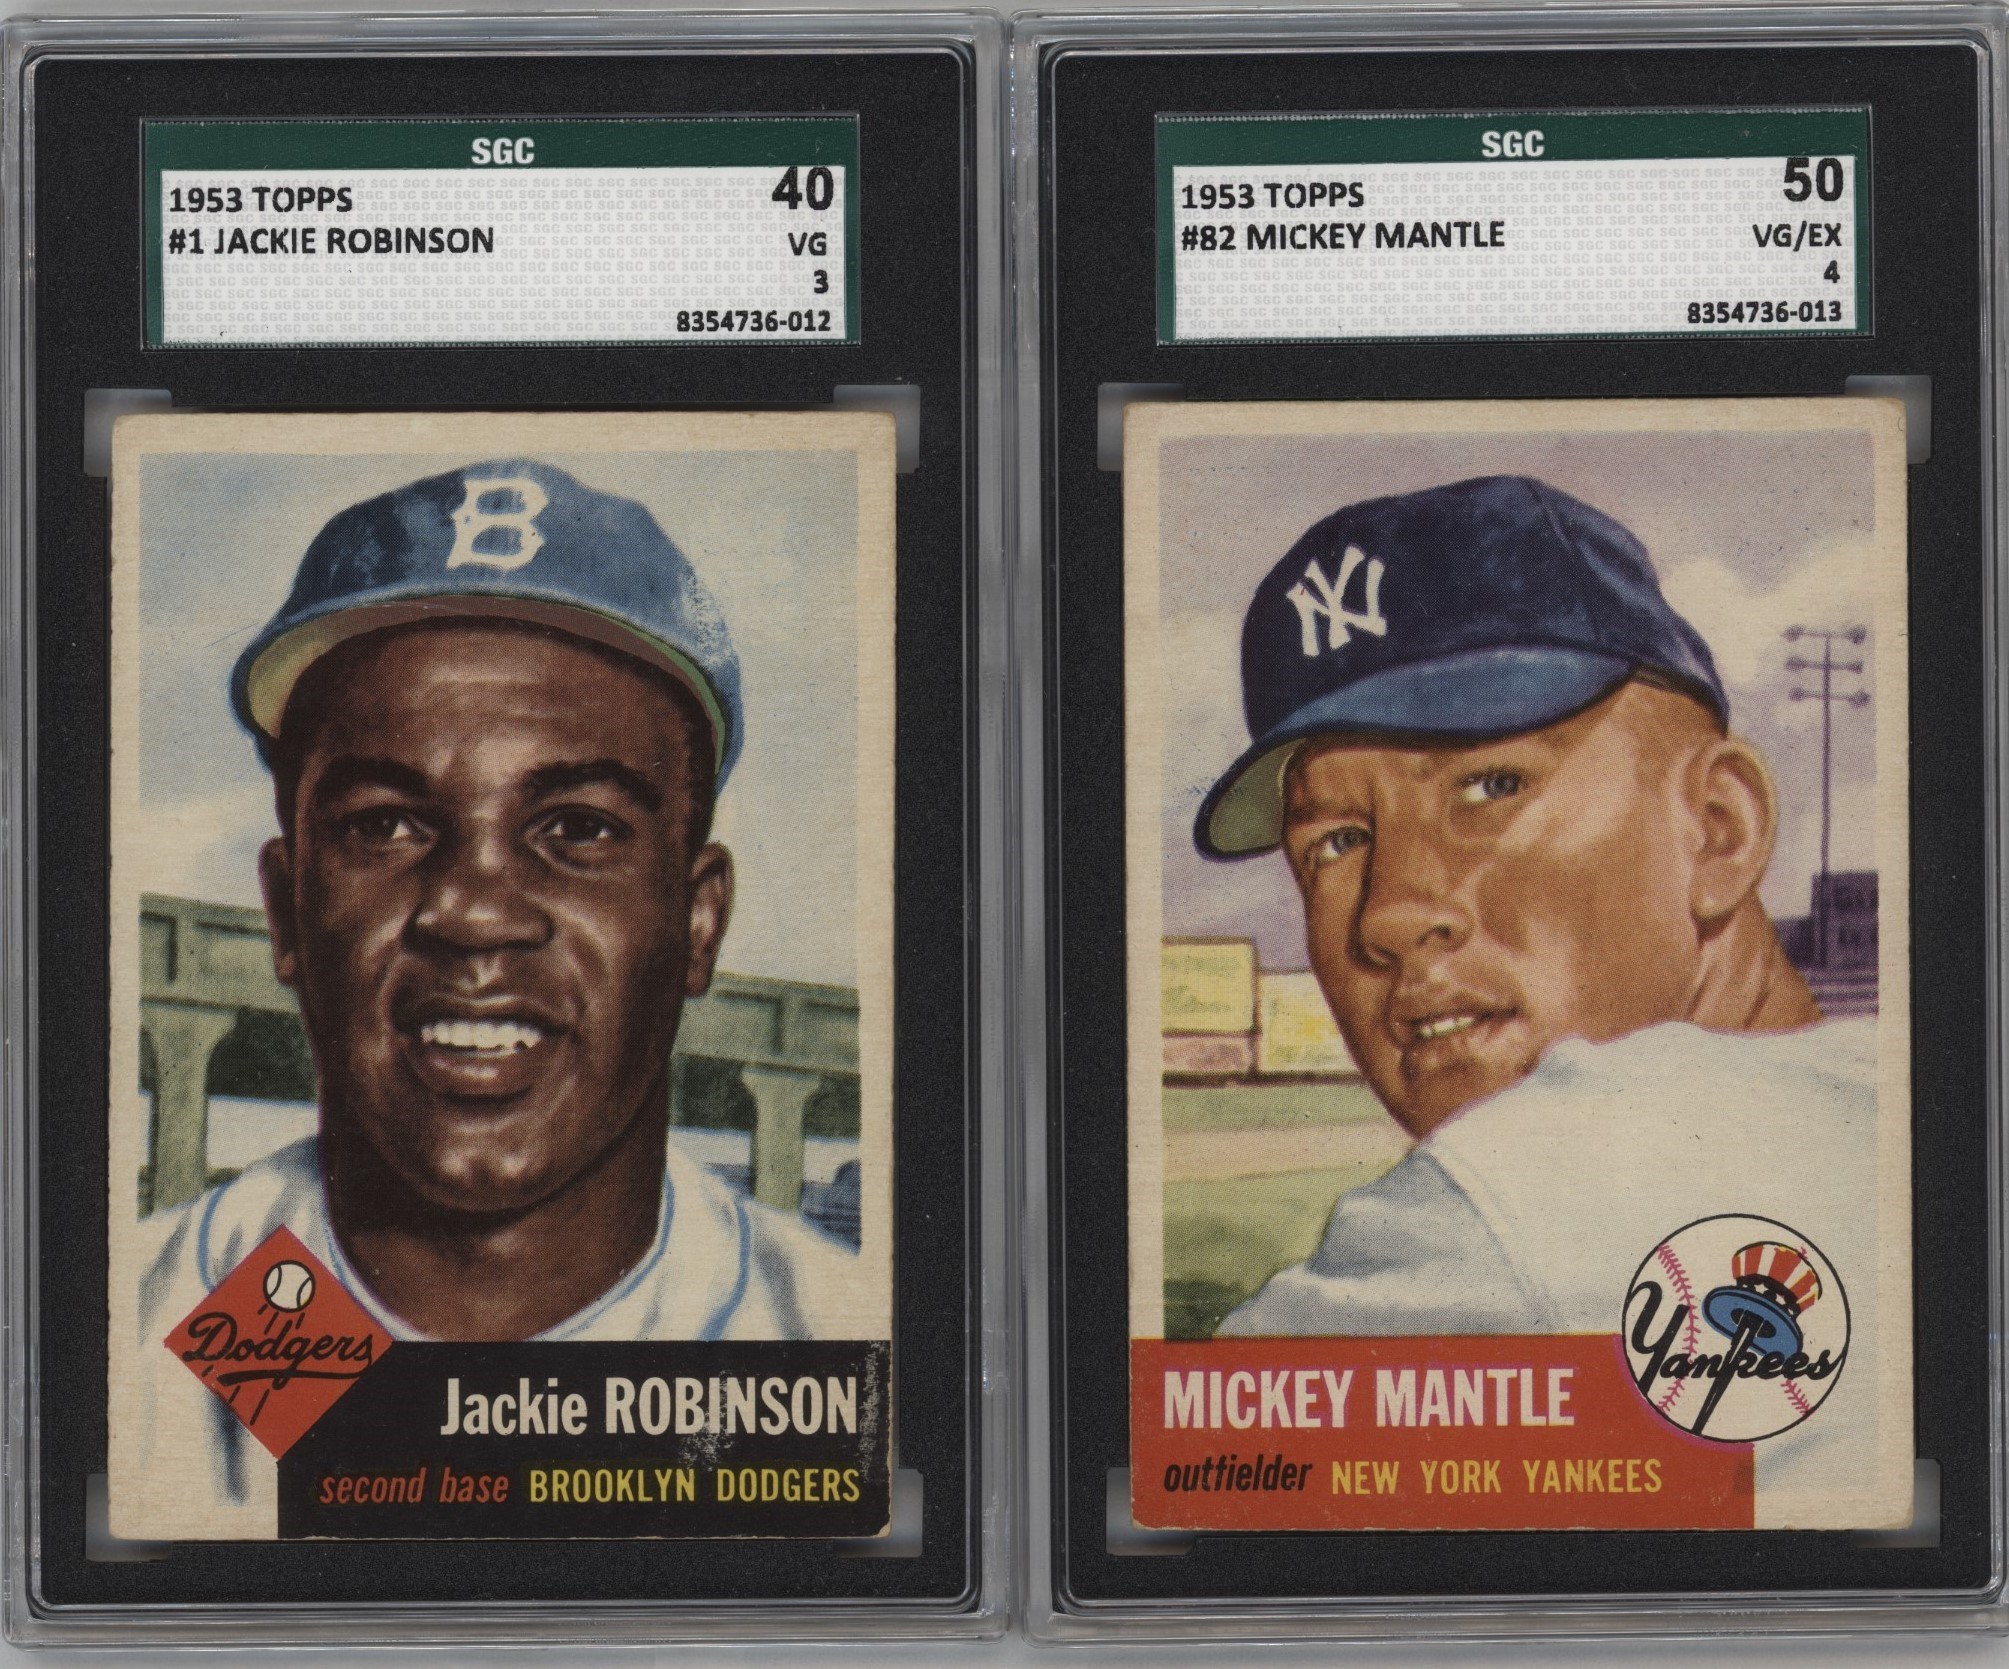 Baseball and Trading Cards - 1953 Topps Baseball Complete Set w/SGC Graded Mantle & Robinson (276)